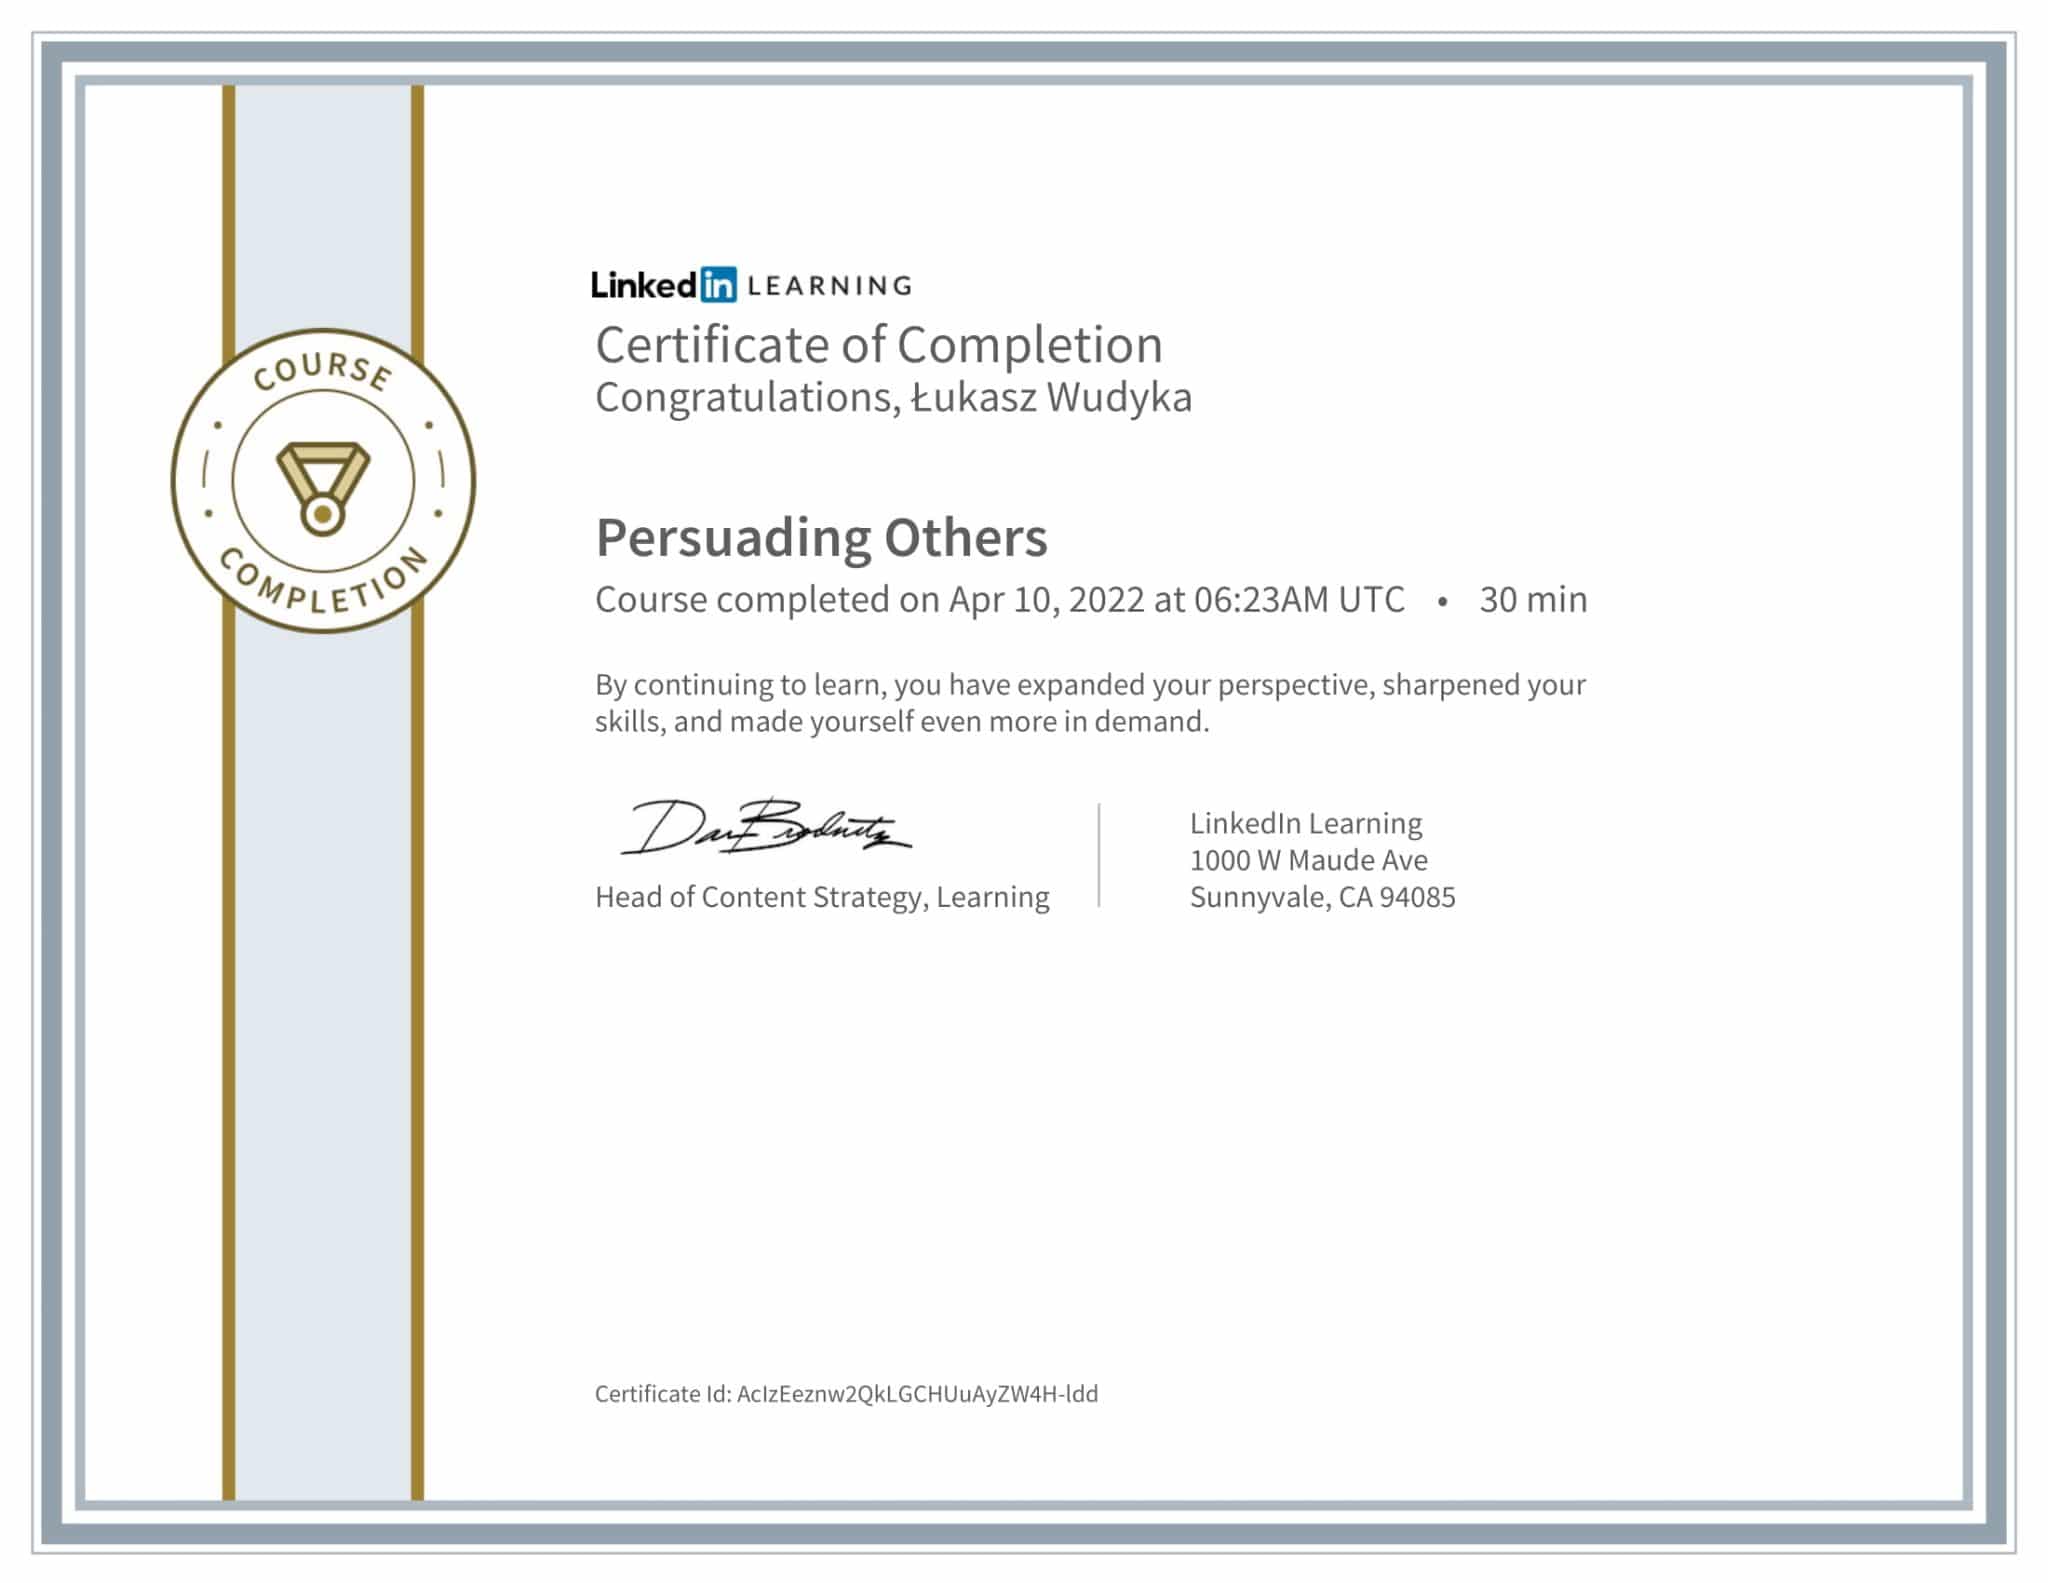 CertificateOfCompletion_Persuading Others-1